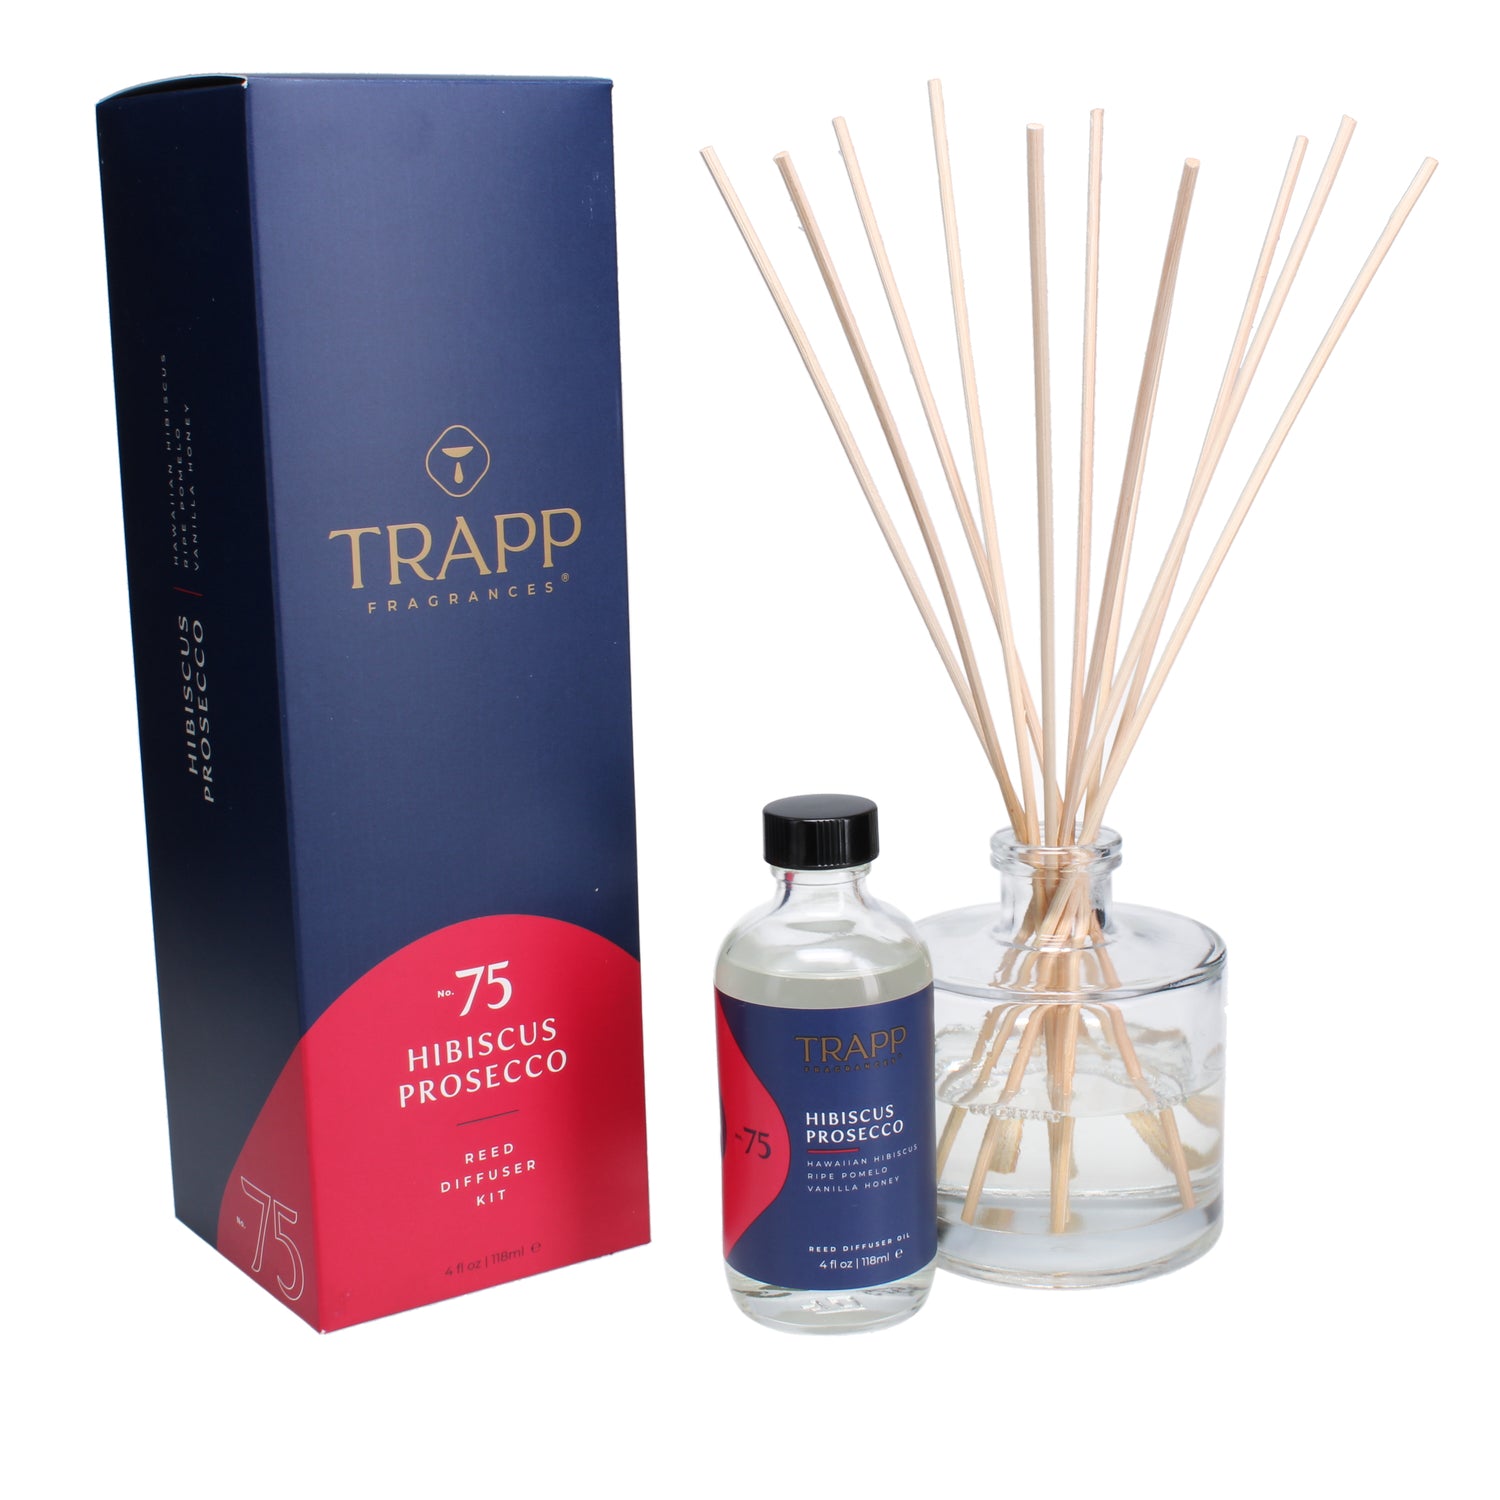 No. 75 Hibiscus Prosecco 4 oz. Reed Diffuser Kit Image 2